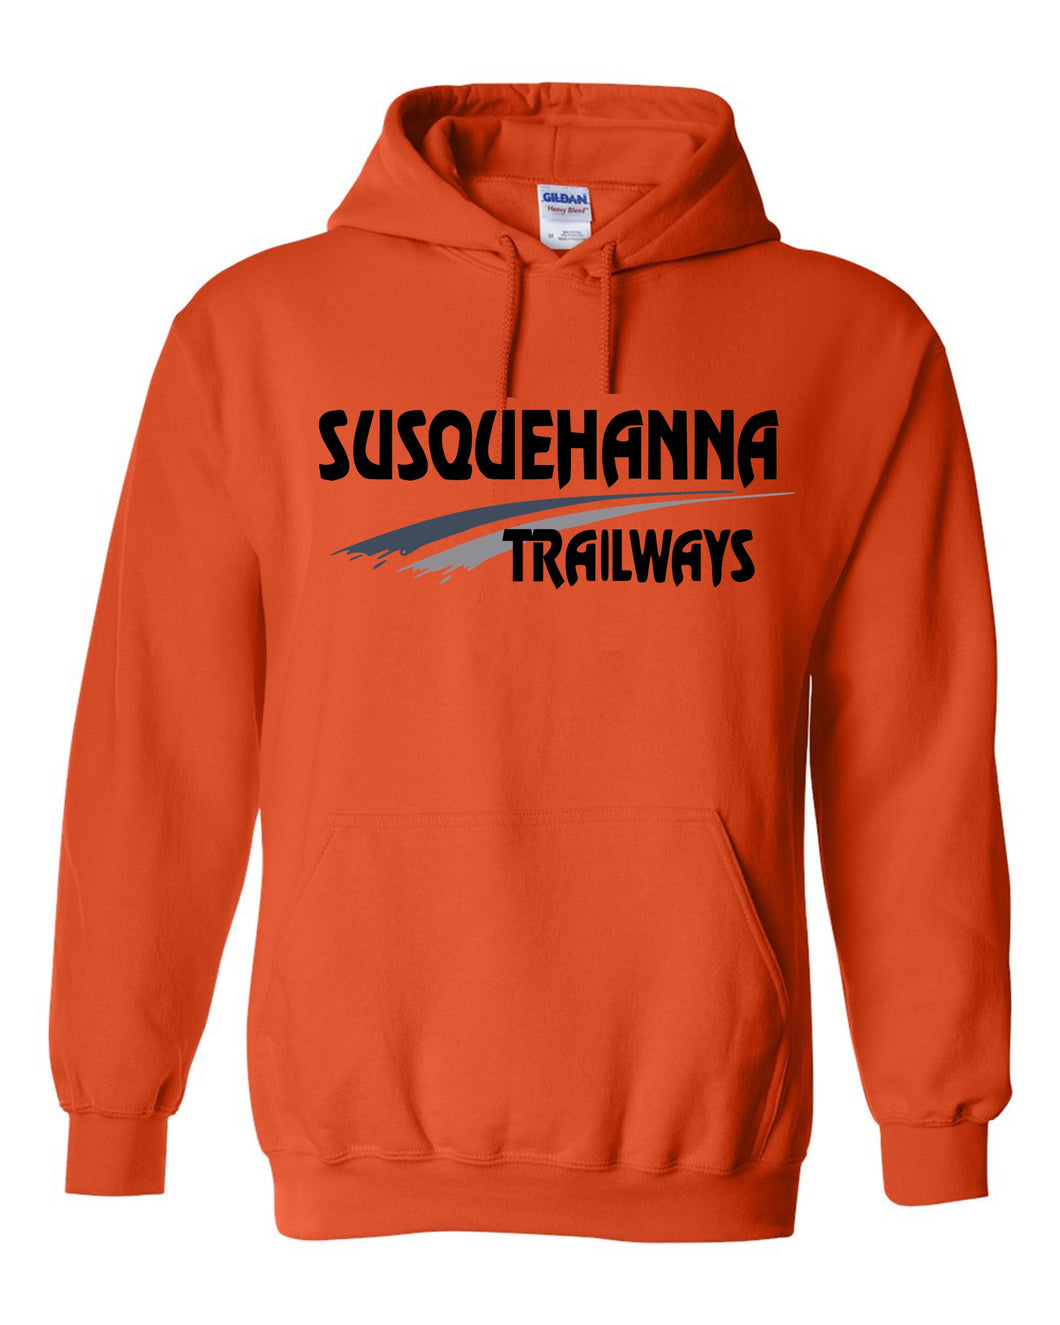 Susquehanna Trailways Hoodie - Youth and Adult